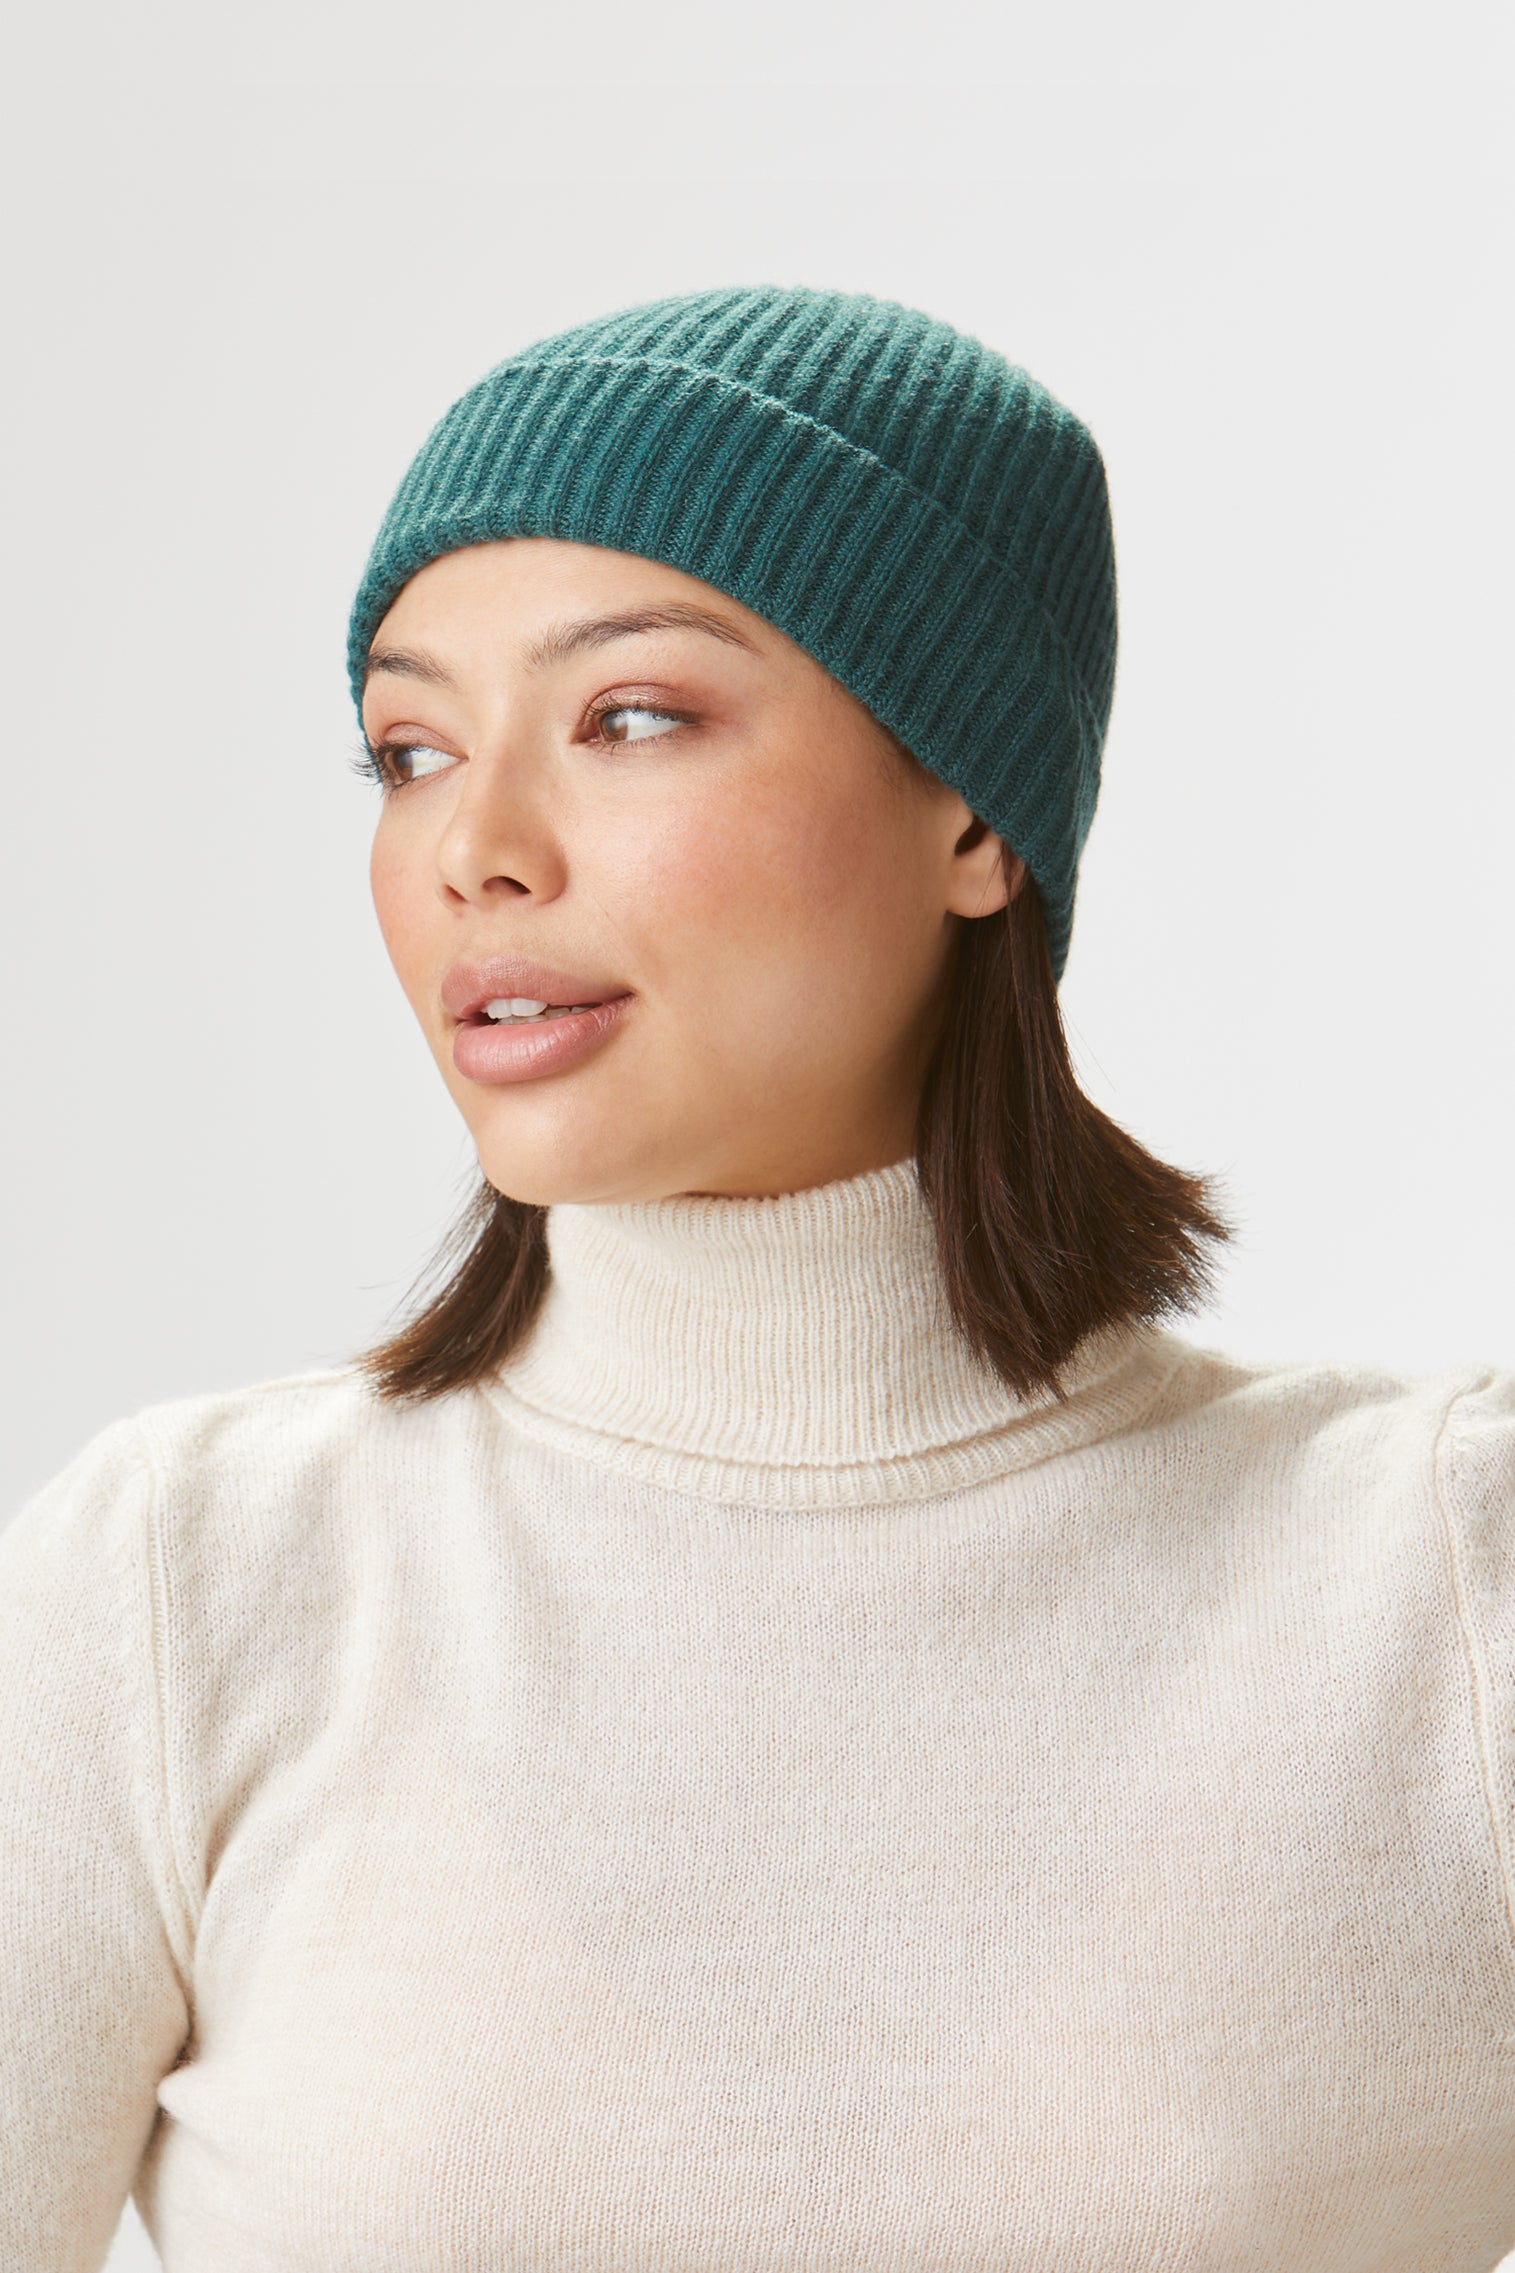 Green Cashmere Ski Beanie - New Season Hat Collection - Lock & Co. Hatters London UK